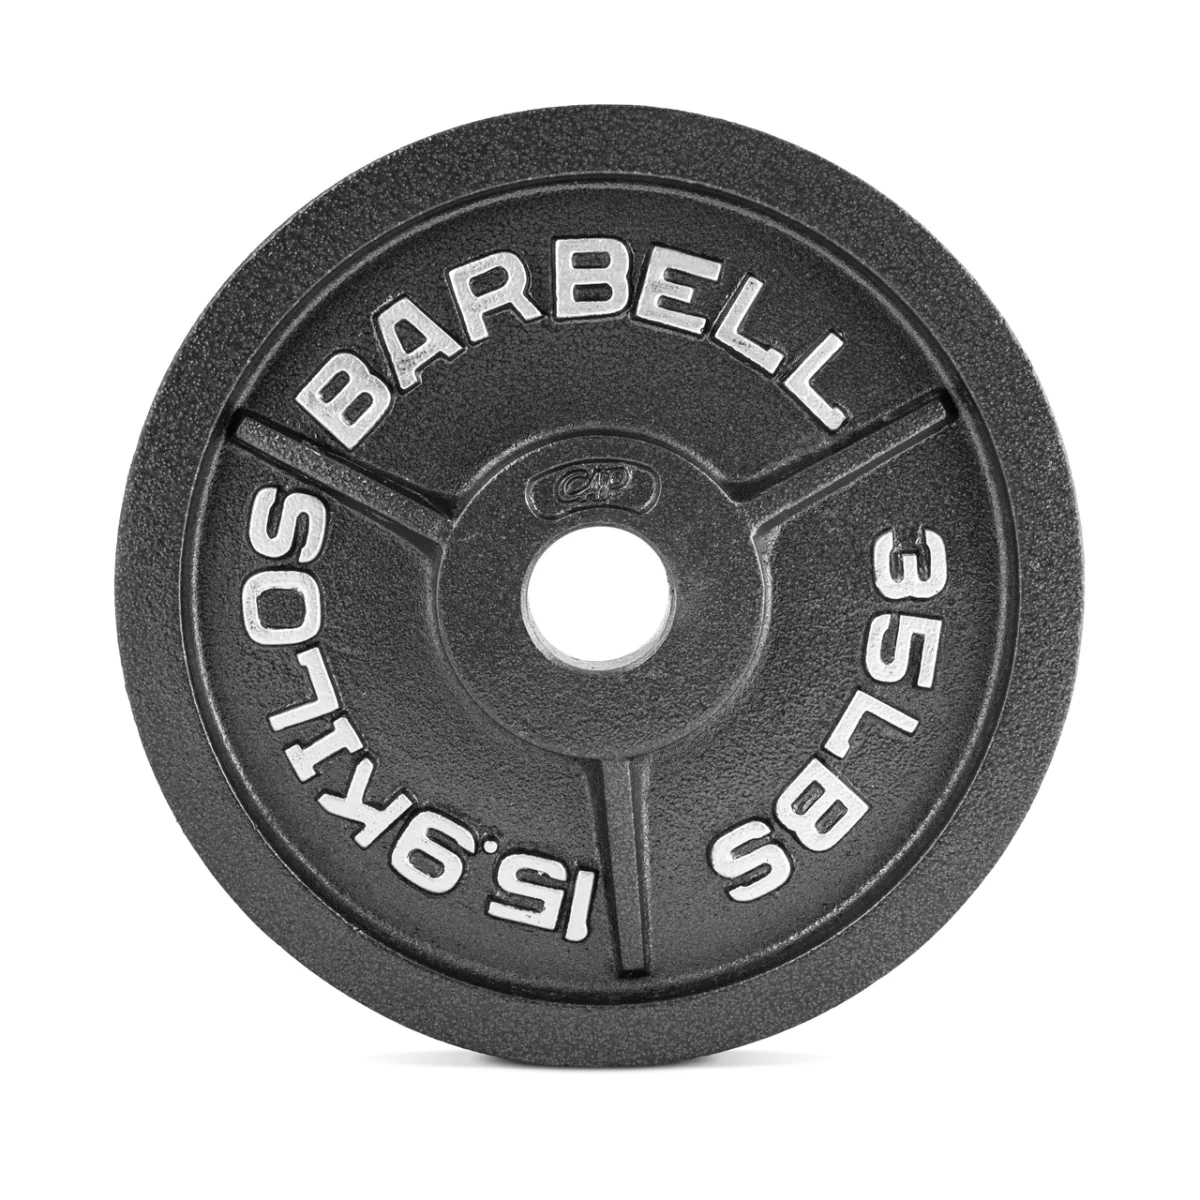 CAP 4x 10lb Barbell Standard 1" Weight Plate In Hand SHIPS TODAY! 40 lb Total 